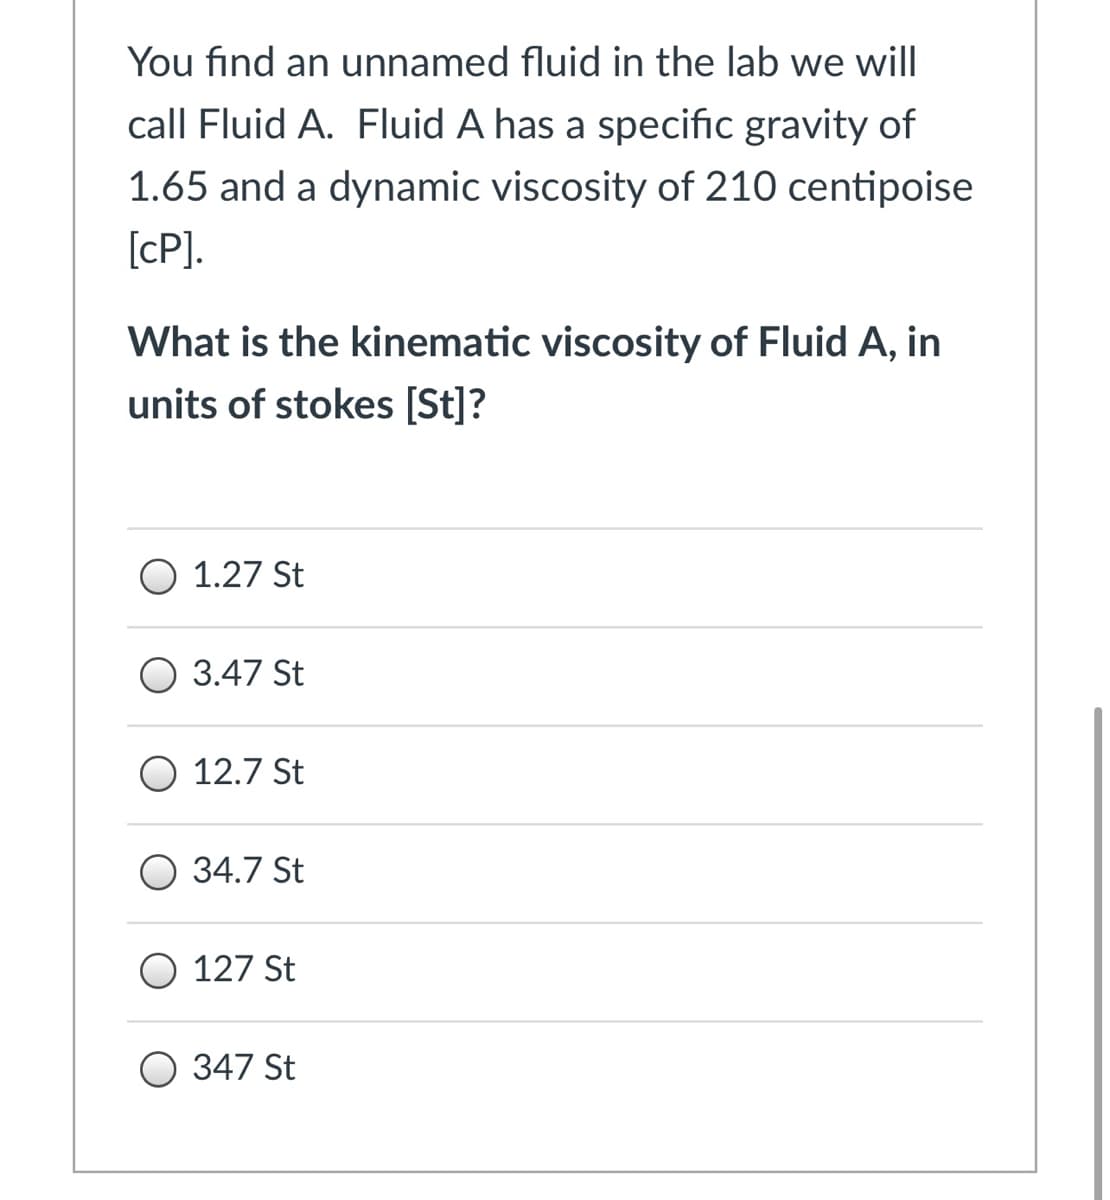 You find an unnamed fluid in the lab we will
call Fluid A. Fluid A has a specific gravity of
1.65 and a dynamic viscosity of 210 centipoise
[cP].
What is the kinematic viscosity of Fluid A, in
units of stokes [St]?
O 1.27 St
О 3.47 St
O 12.7 St
O 34.7 St
O 127 St
О 347 St
